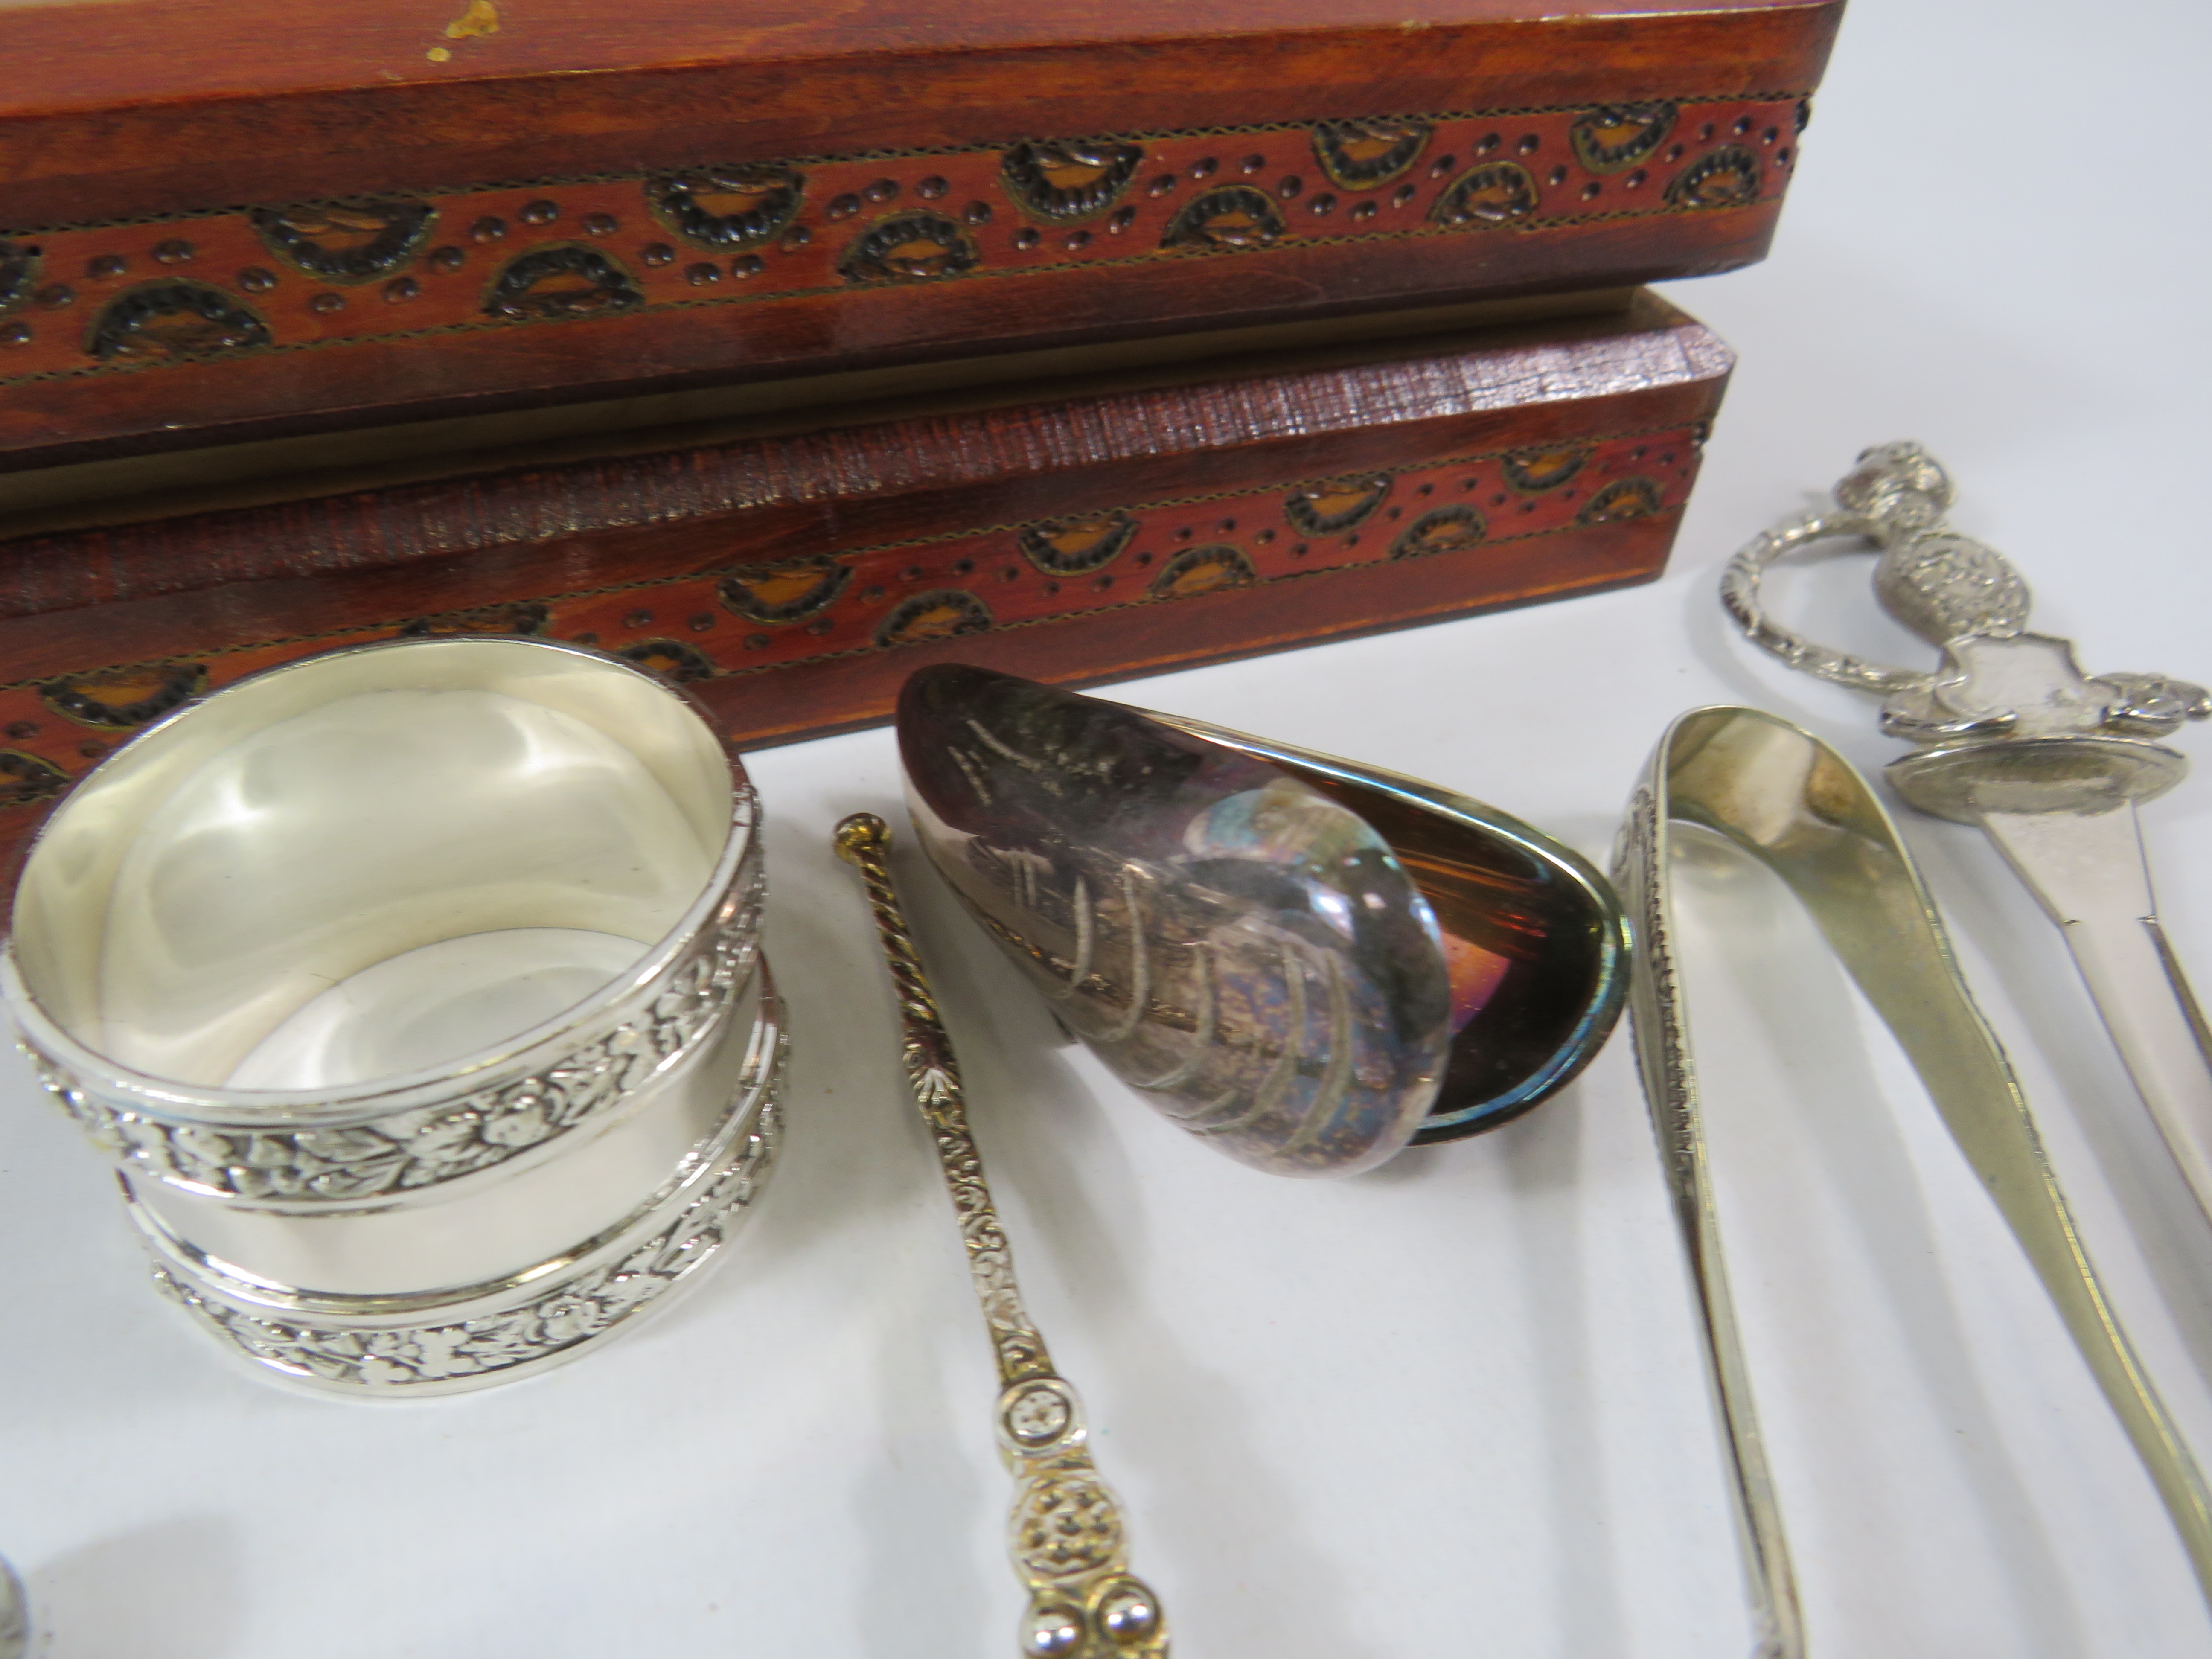 Wooden box and contents including a pair of art nouveau pincers, napkin rings etc. - Image 3 of 4